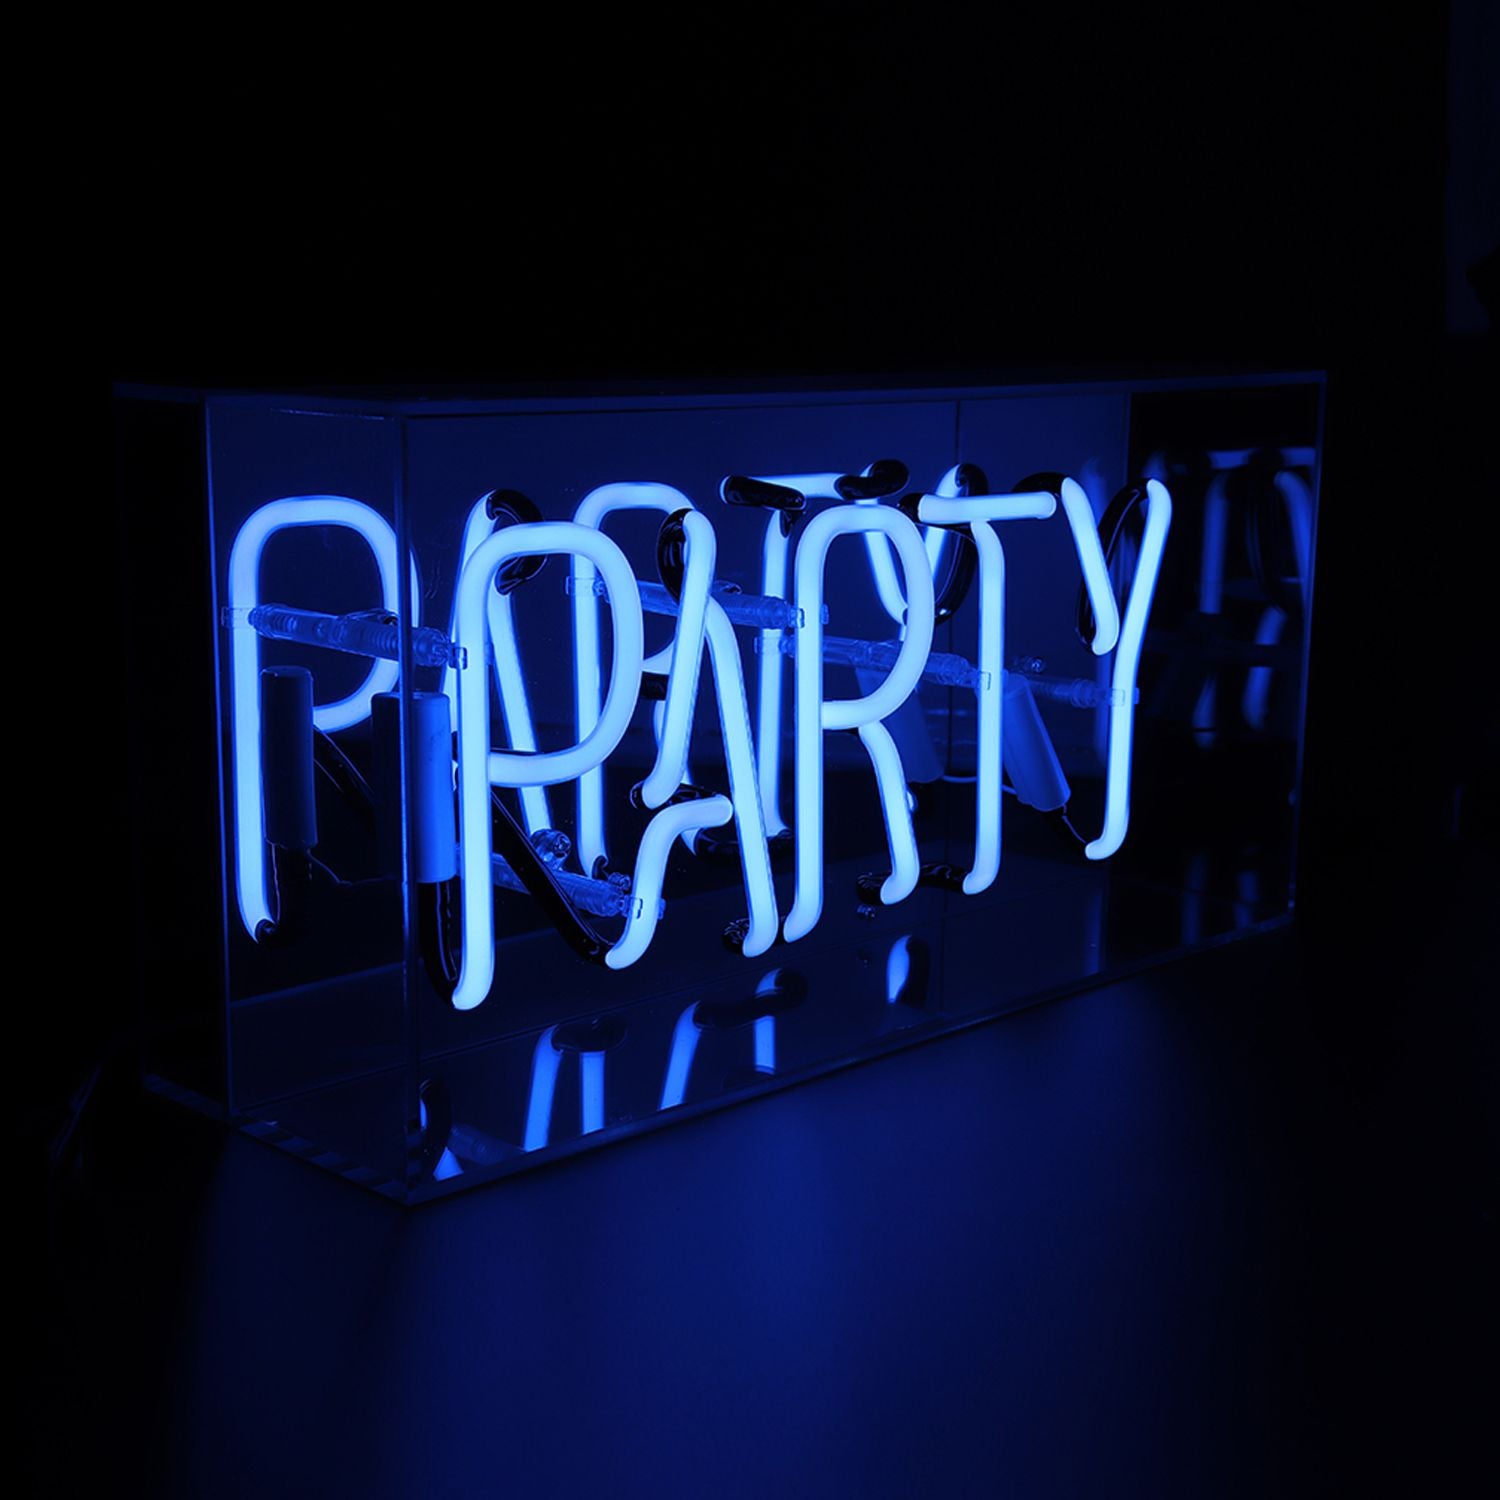 Party - Neon Blue